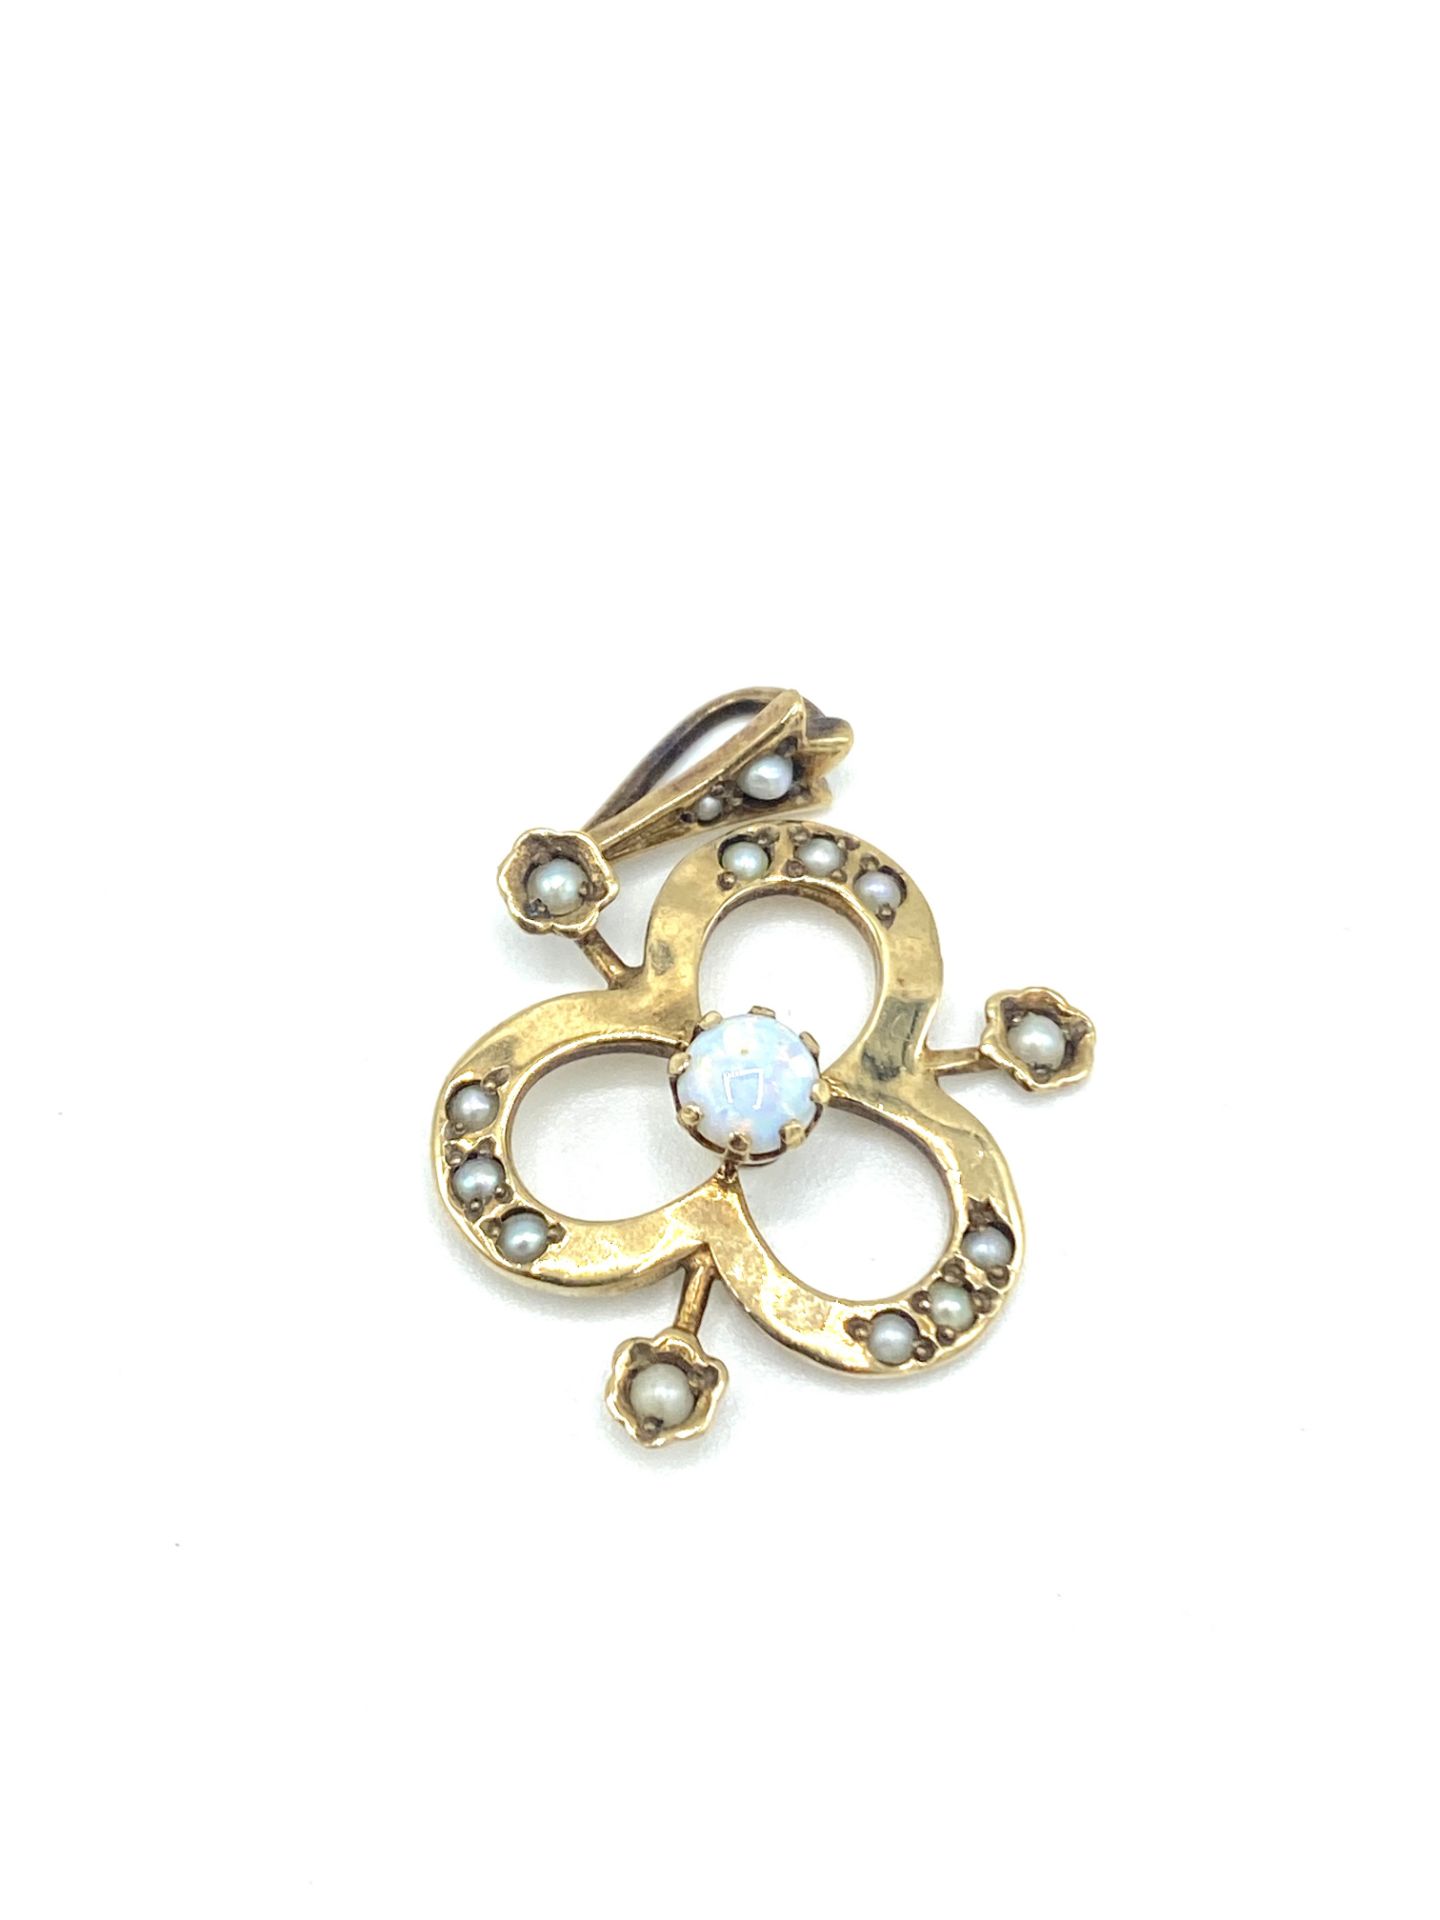 9ct gold, opal and seed pearl pendant